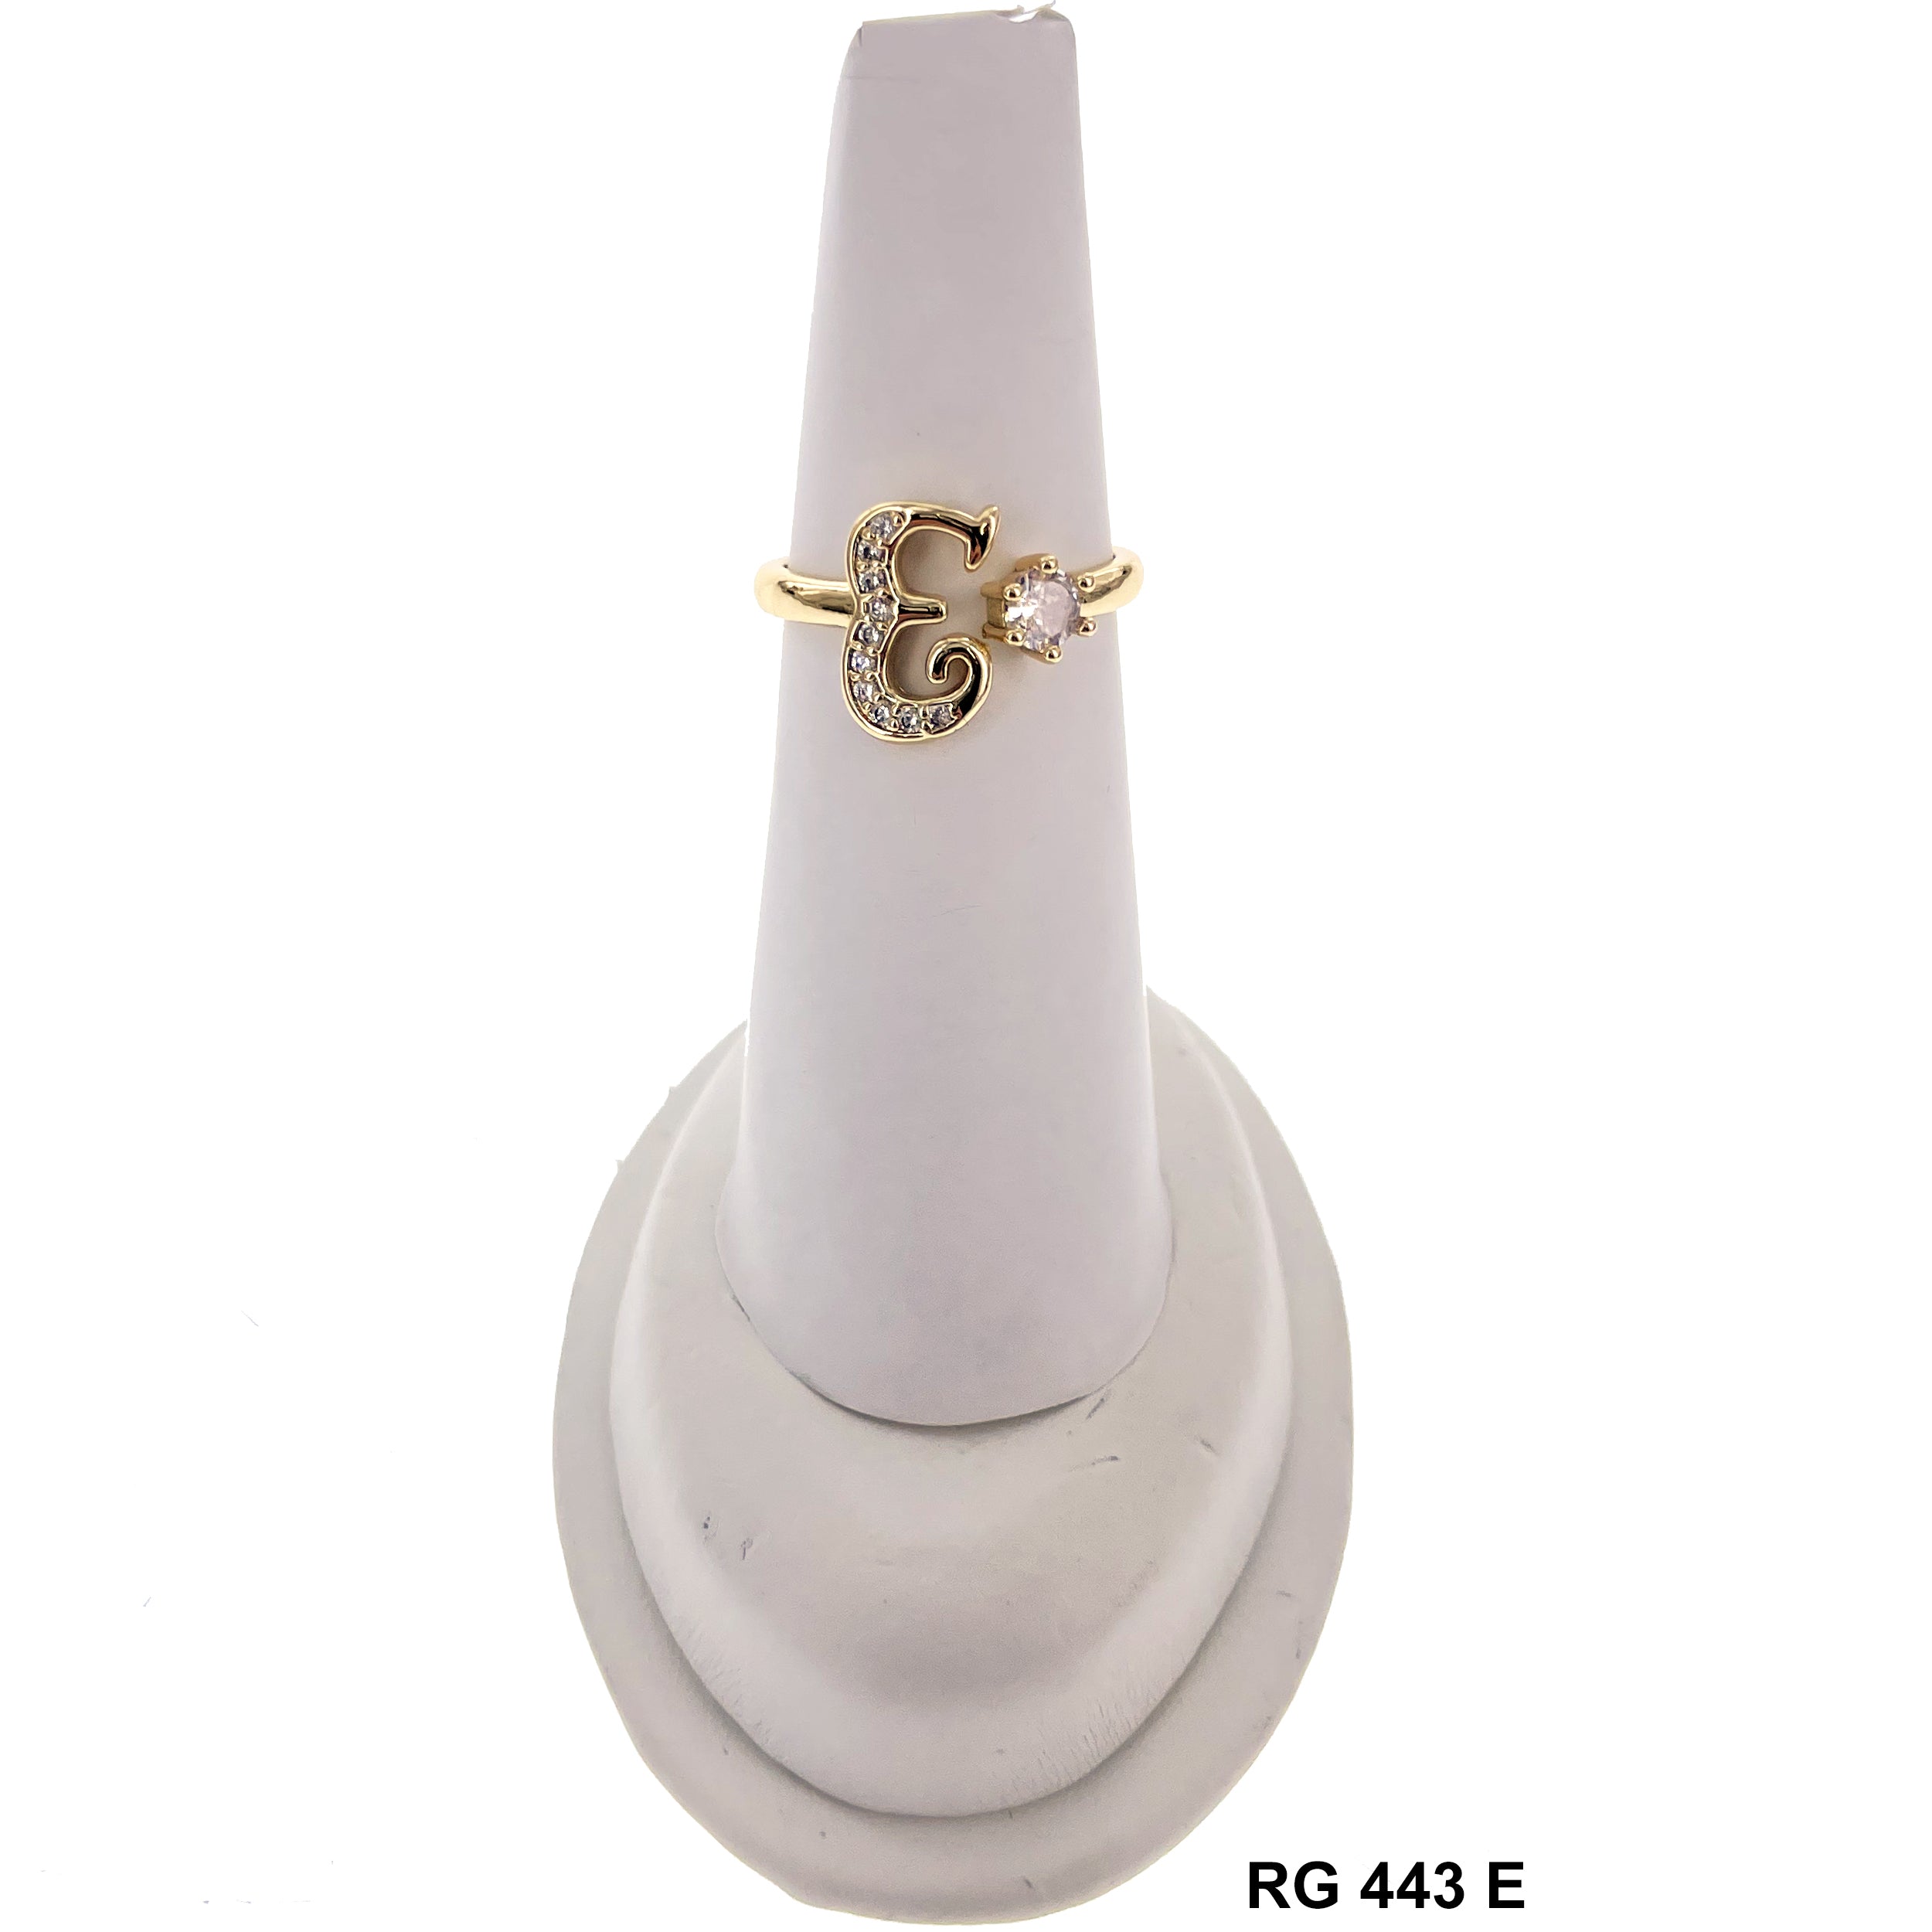 Initial Adjustable Ring RG 443 E